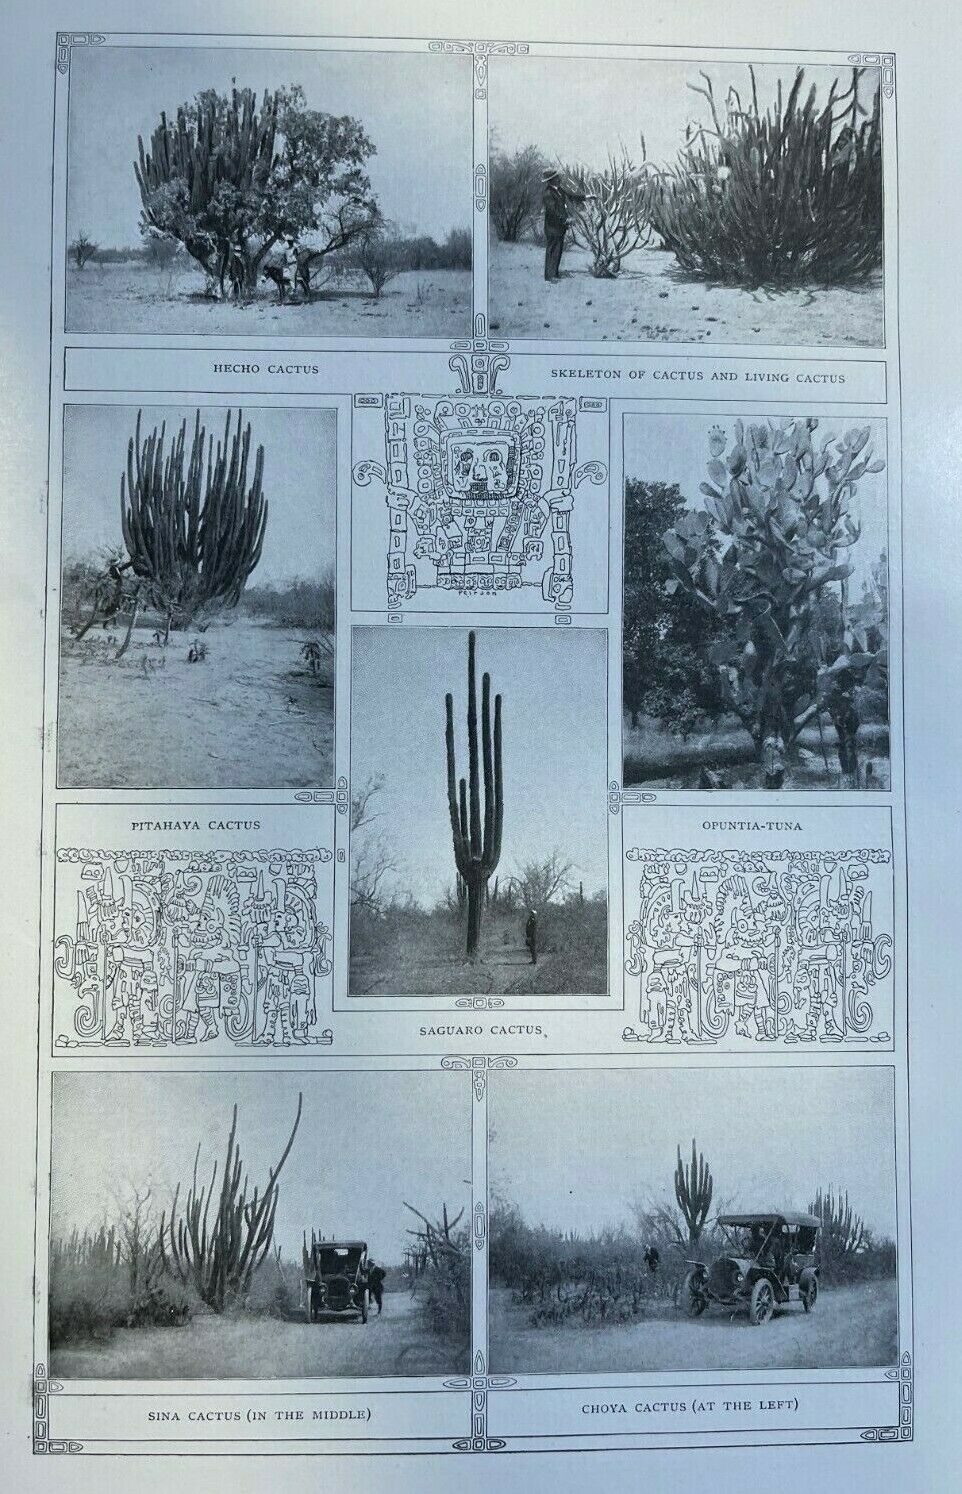 1910 Giant Cactus Forest Tobari Bay Sonora Mexico illustrated